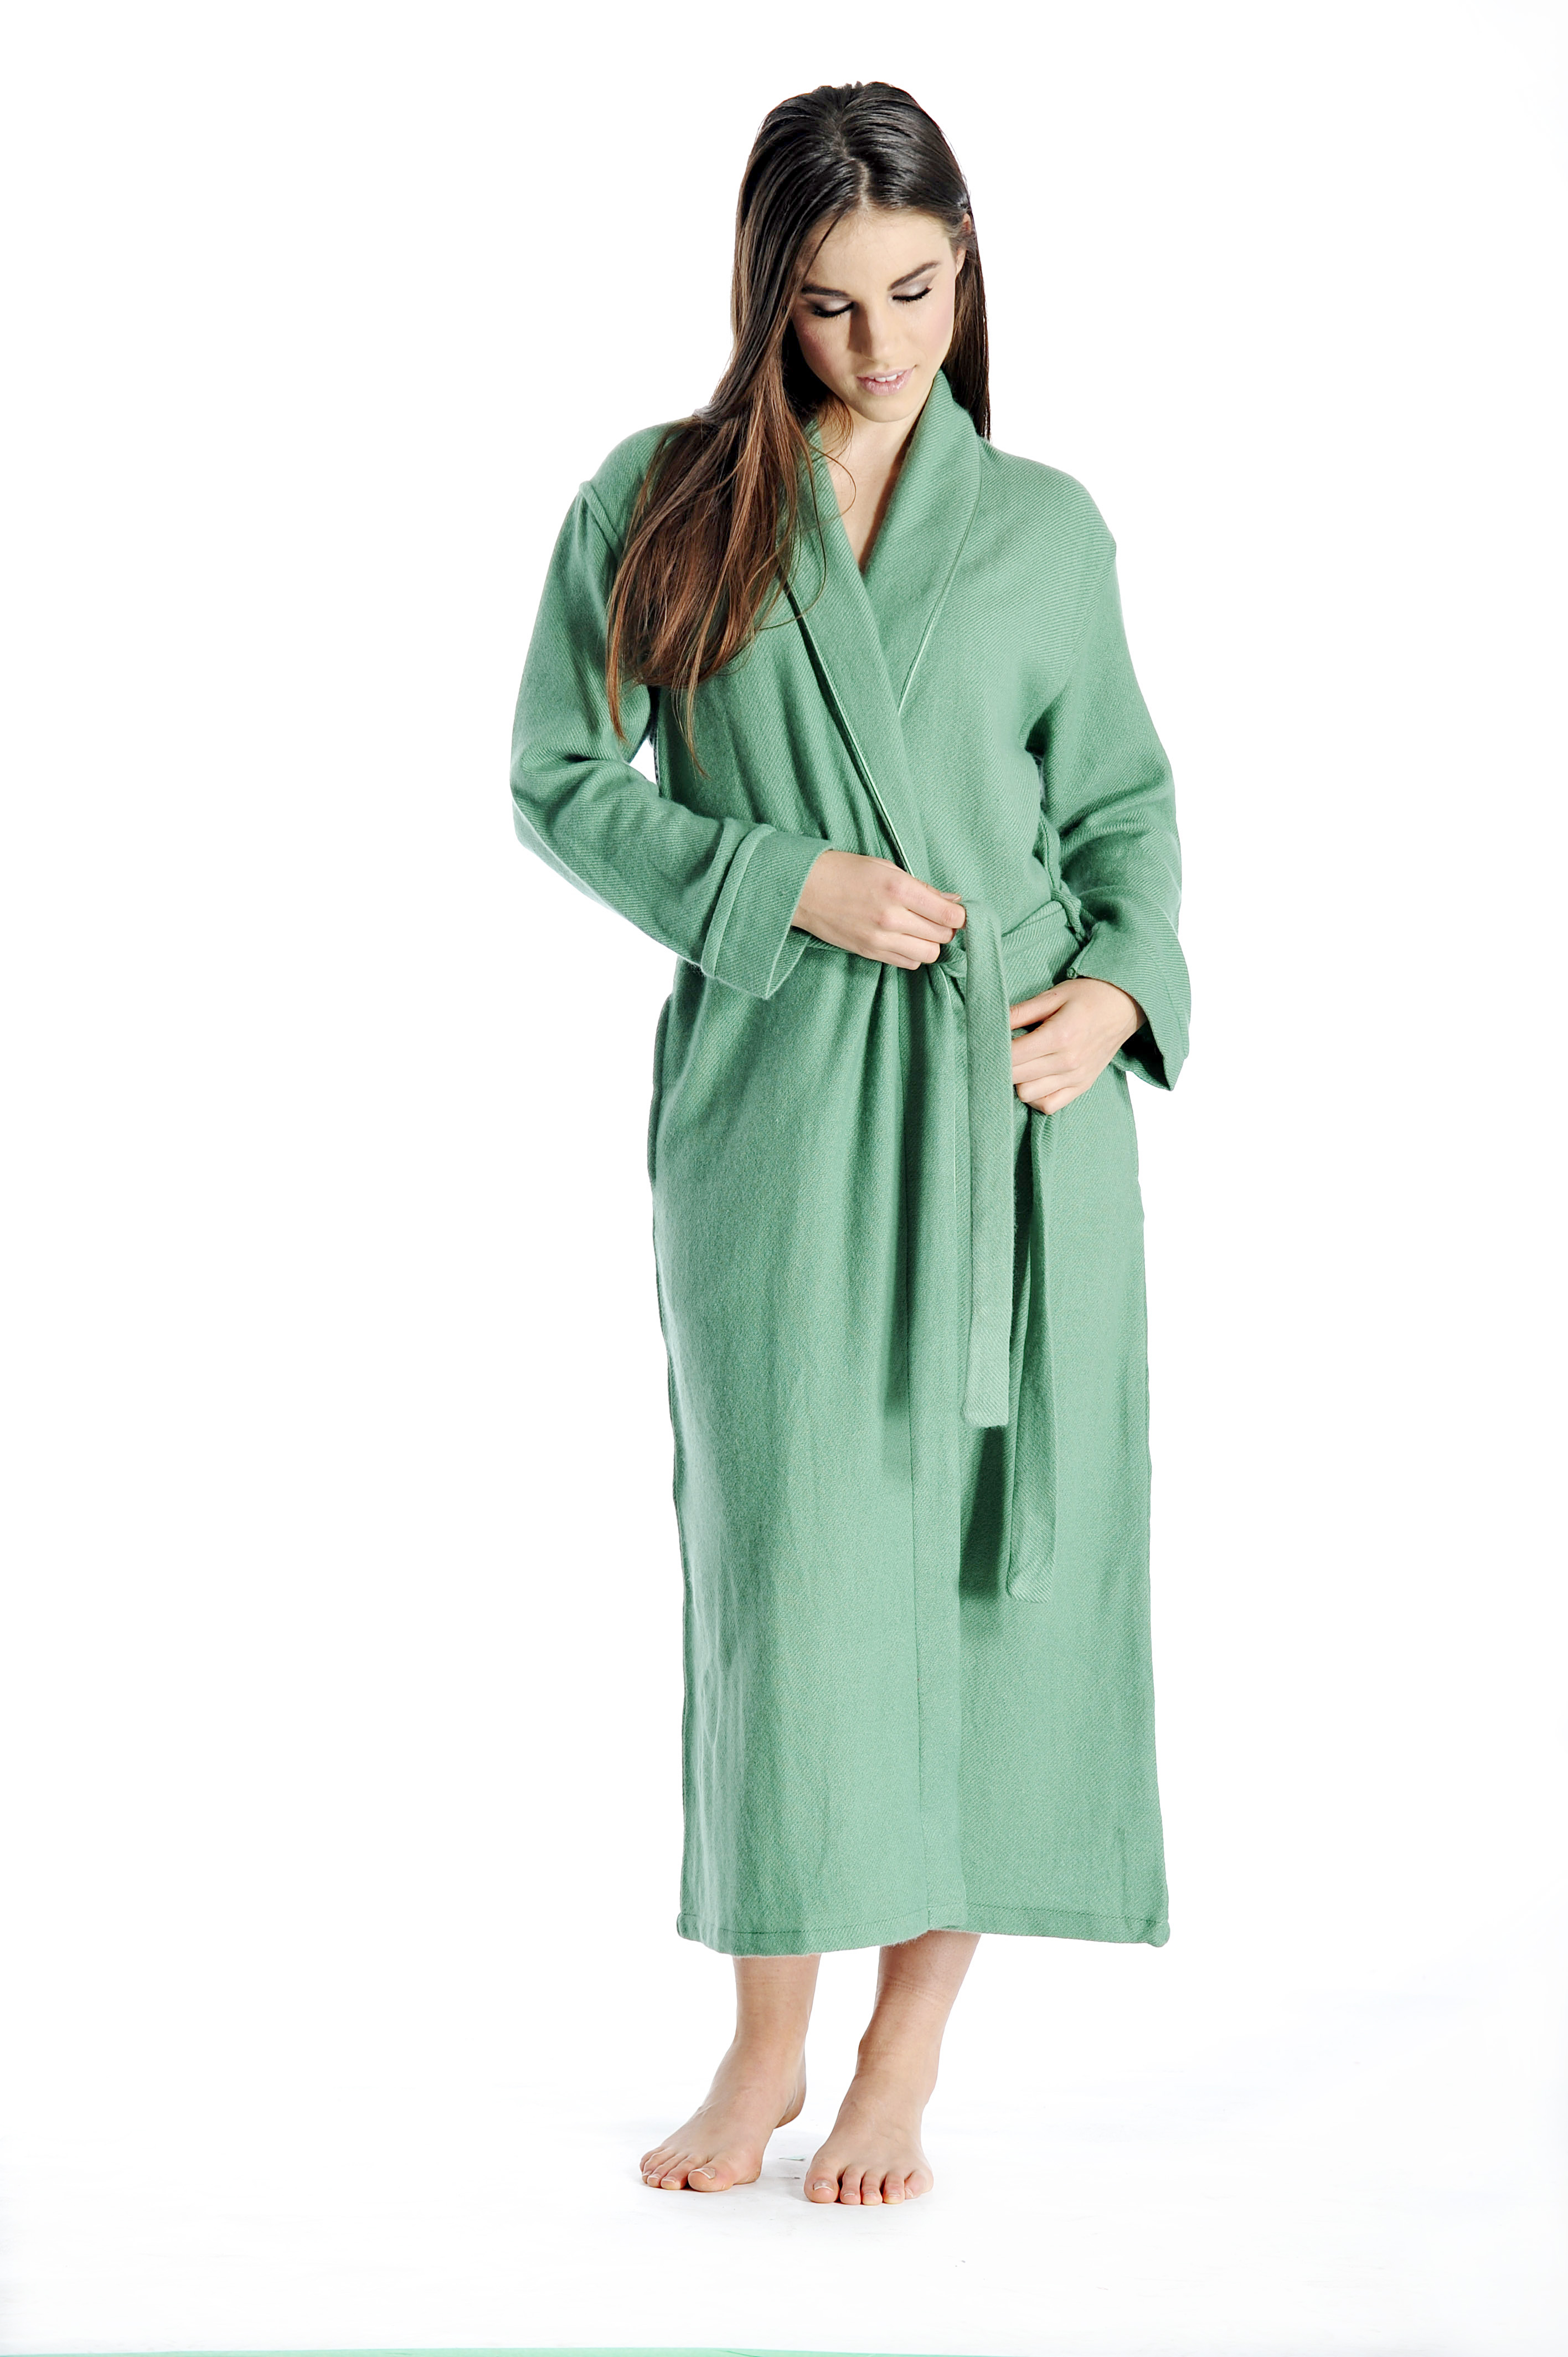 Pure Cashmere Full Length Robe for Women (Pale Peach, Large/Extra Large)